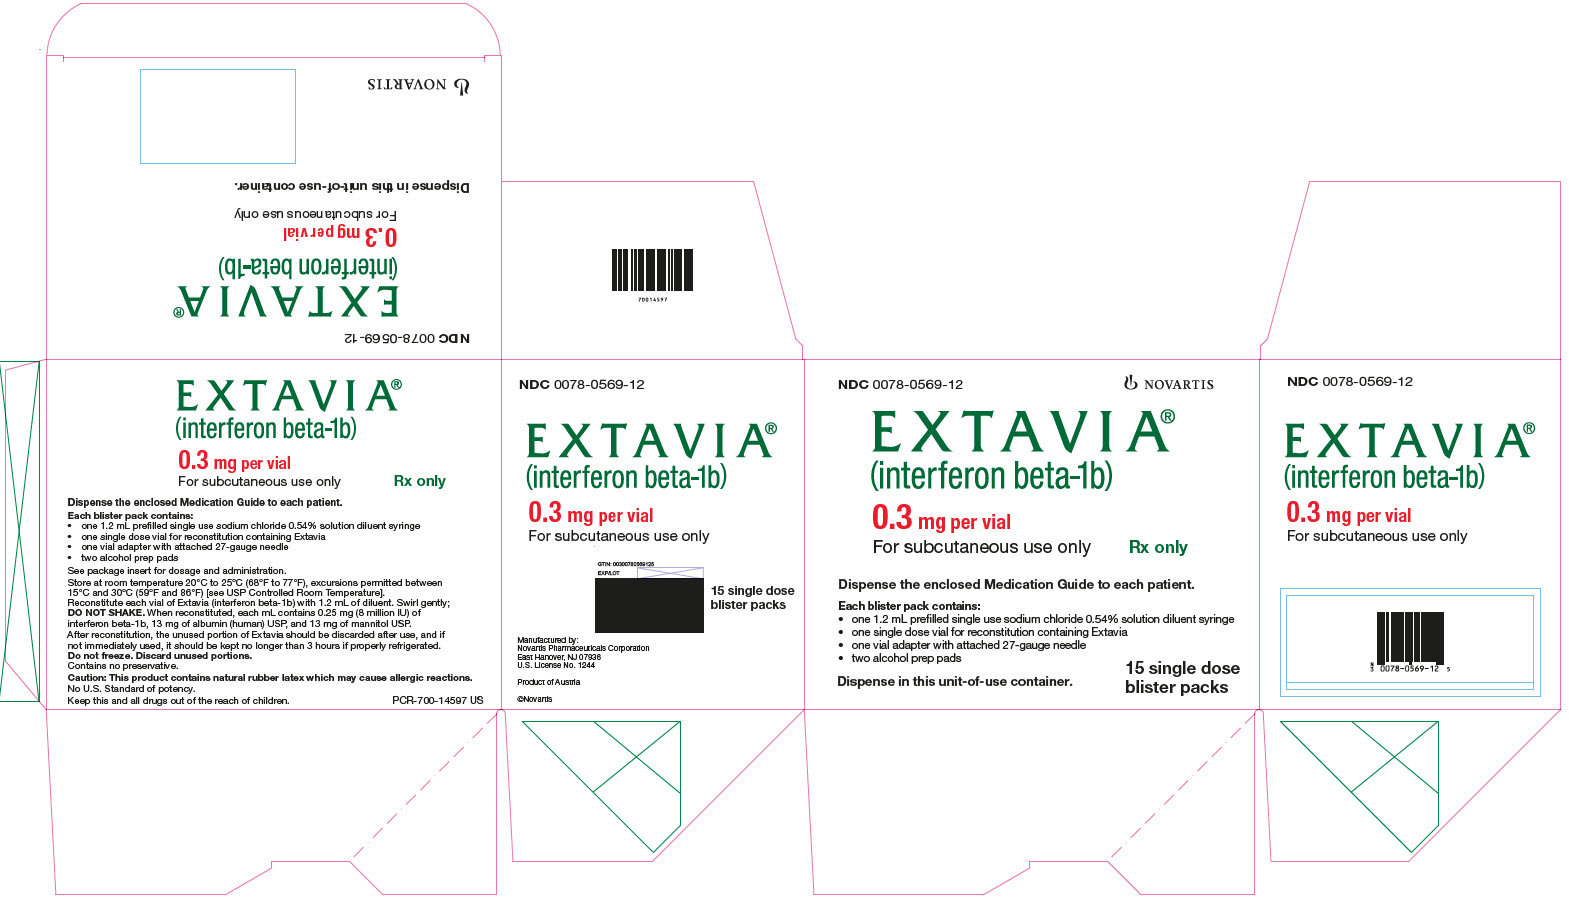 PRINCIPAL DISPLAY PANEL
									NDC 0078-0569-12
									NOVARTIS
									EXTAVIA®
									(interferon beta-1b)
									0.3 mg per vial
									For subcutaneous use only
									Rx only
									Dispense the enclosed Medication Guide to each patient.
									Each blister pack contains:
									• one 1.2 mL prefilled single use sodium chloride 0.54% solution diluent syringe
									• one single dose vial for reconstitution containing Extavia
									• one vial adapter with attached 27-gauge needle
									• two alcohol prep pads
									Dispense in this unit-of-use container.
									15 single dose blister packs
							